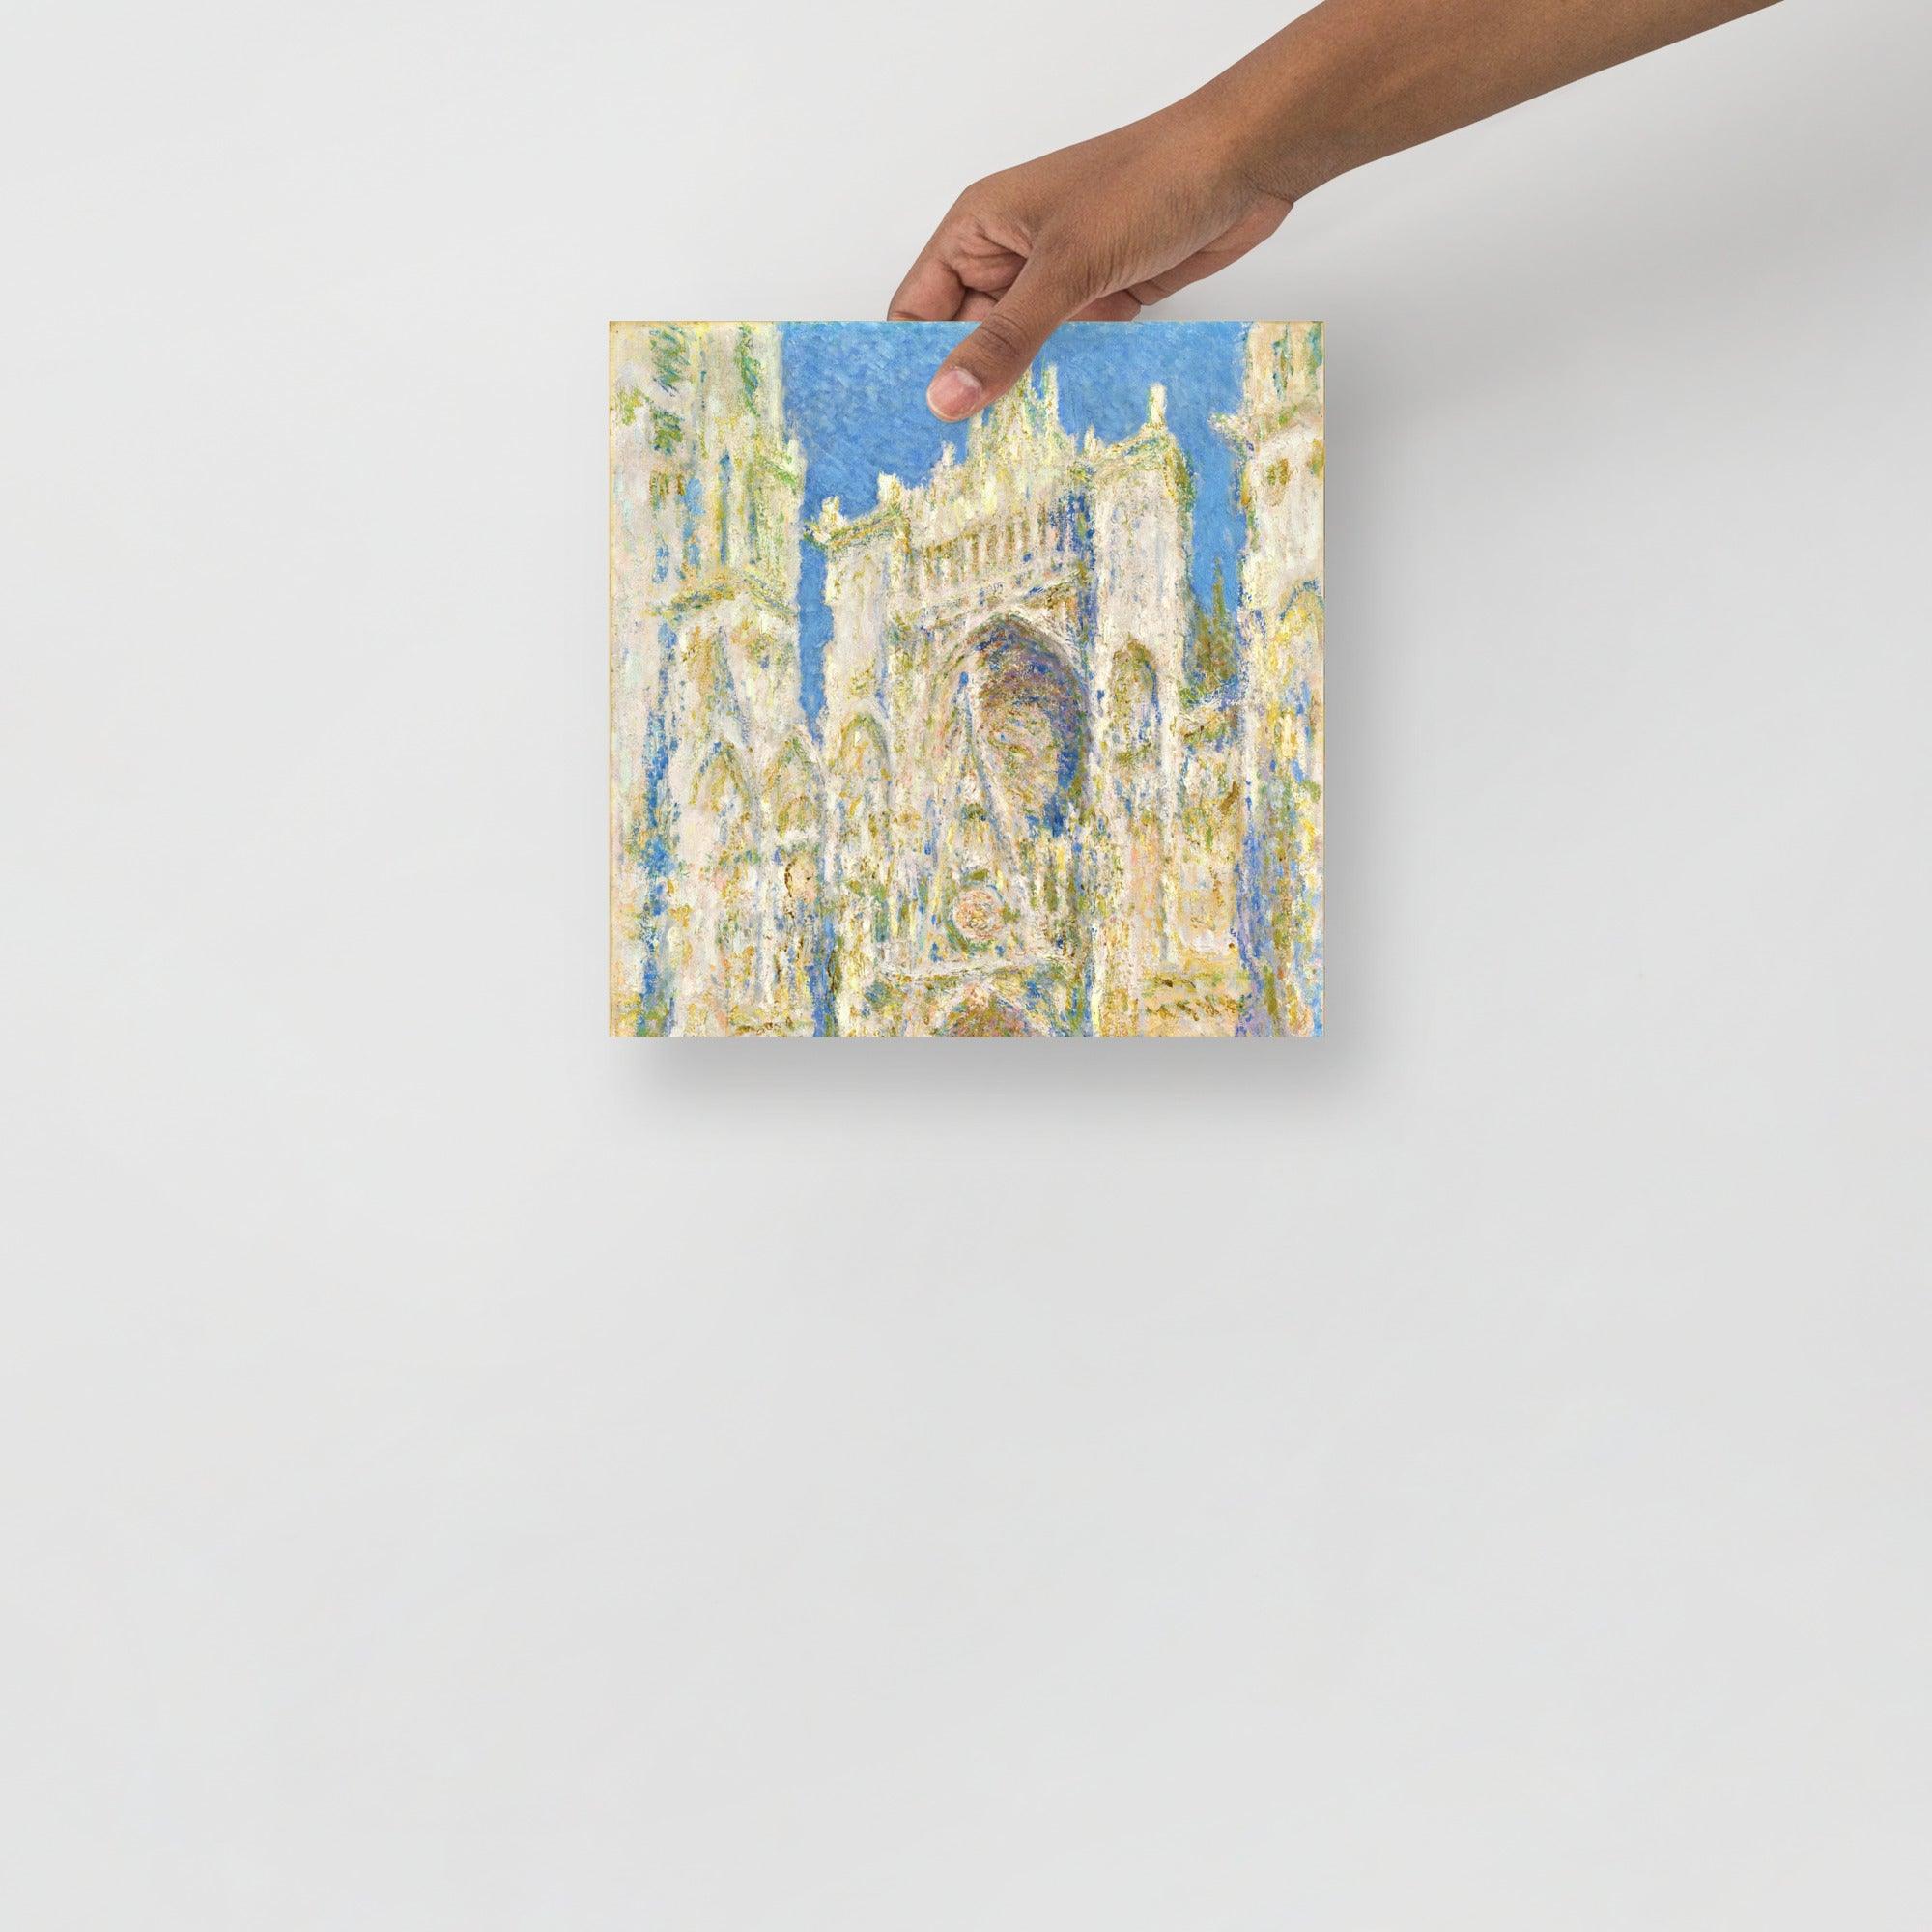 A Rouen Cathedral, West Facade by Claude Monet poster on a plain backdrop in size 10x10”.